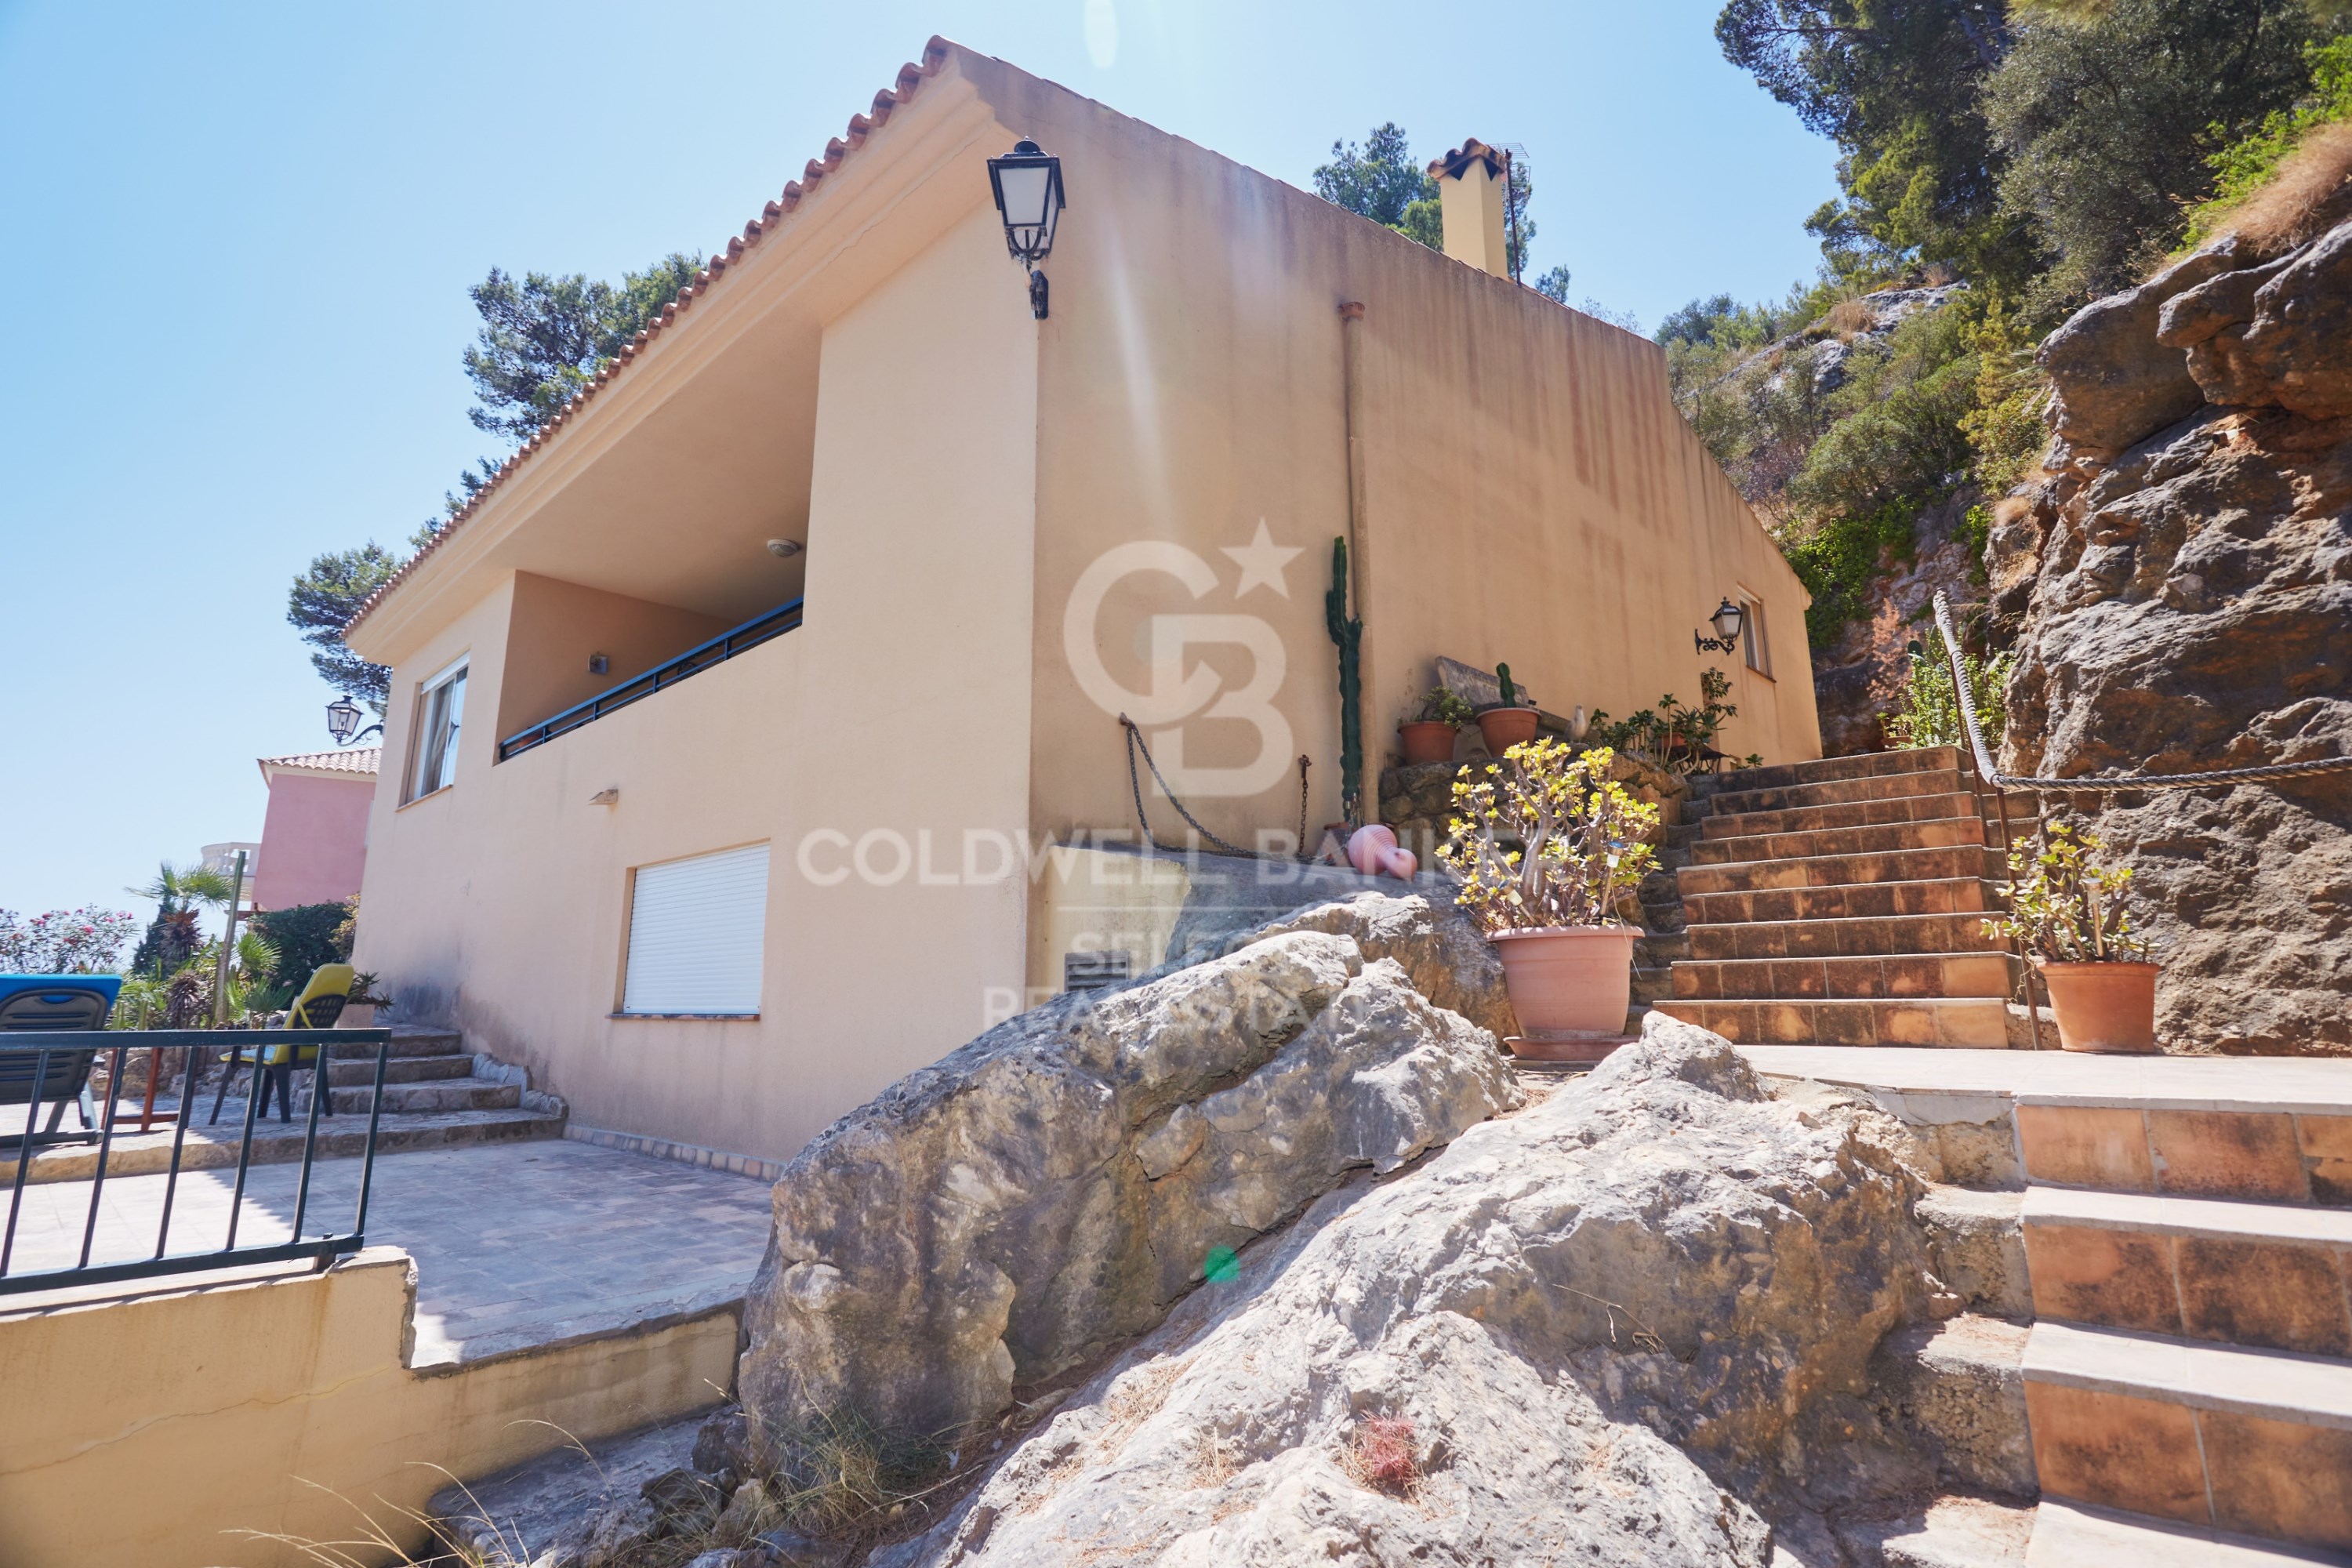 Detached house for sale with views of the Bay of Pollenca